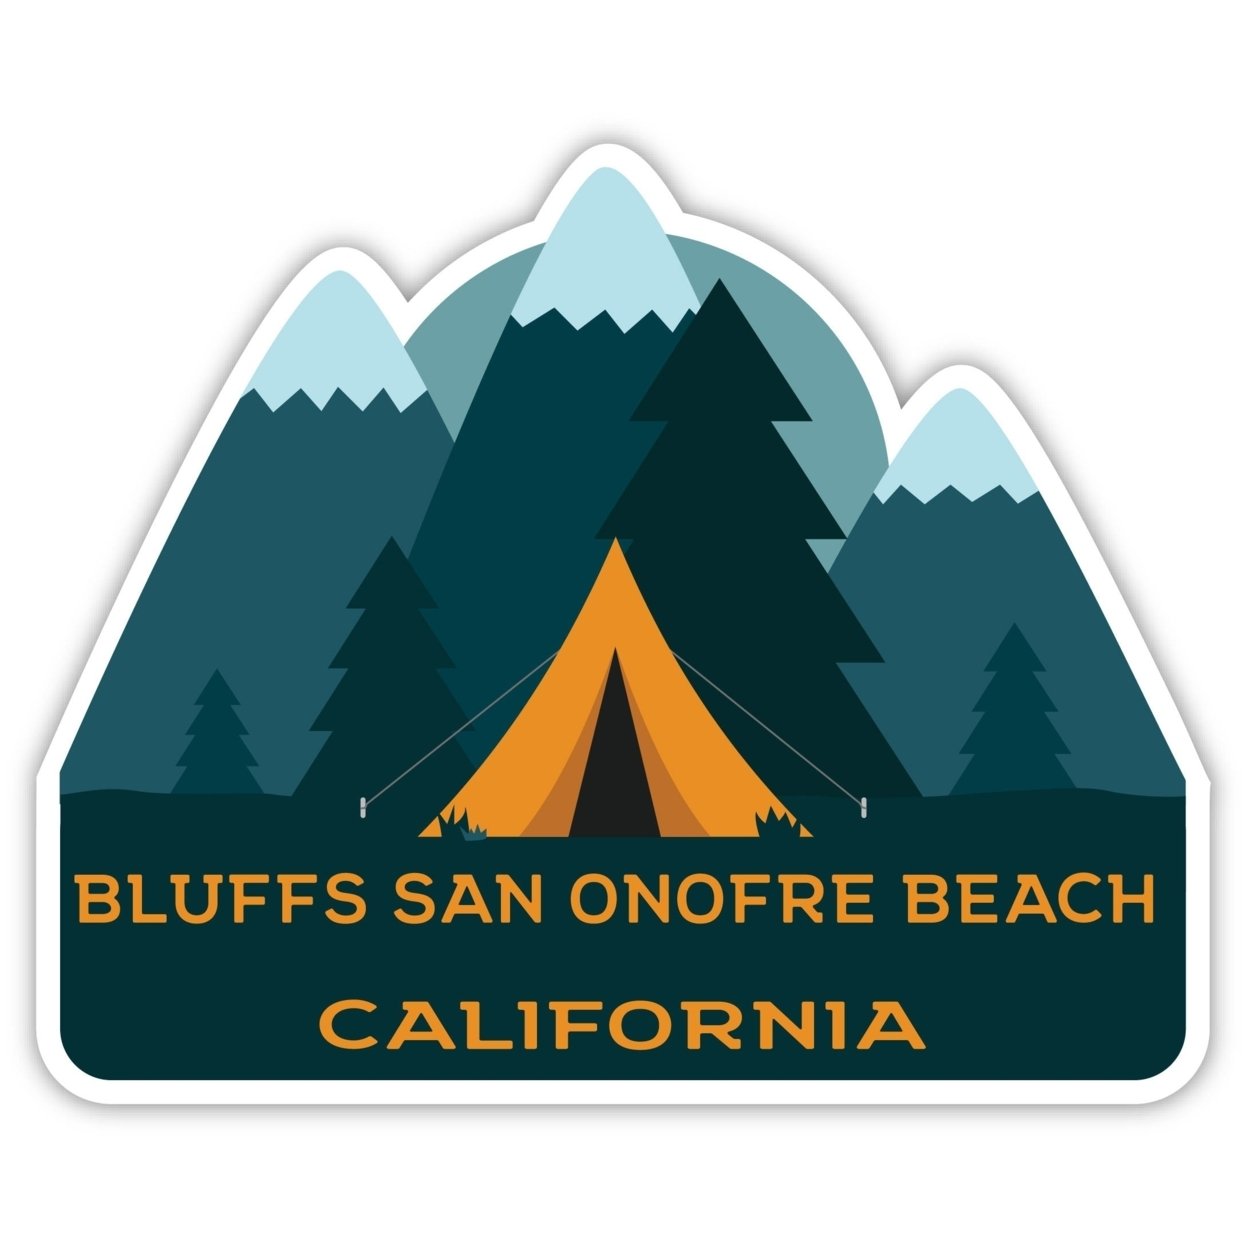 Bluffs San Onofre Beach California Souvenir Decorative Stickers (Choose Theme And Size) - 4-Pack, 4-Inch, Camp Life